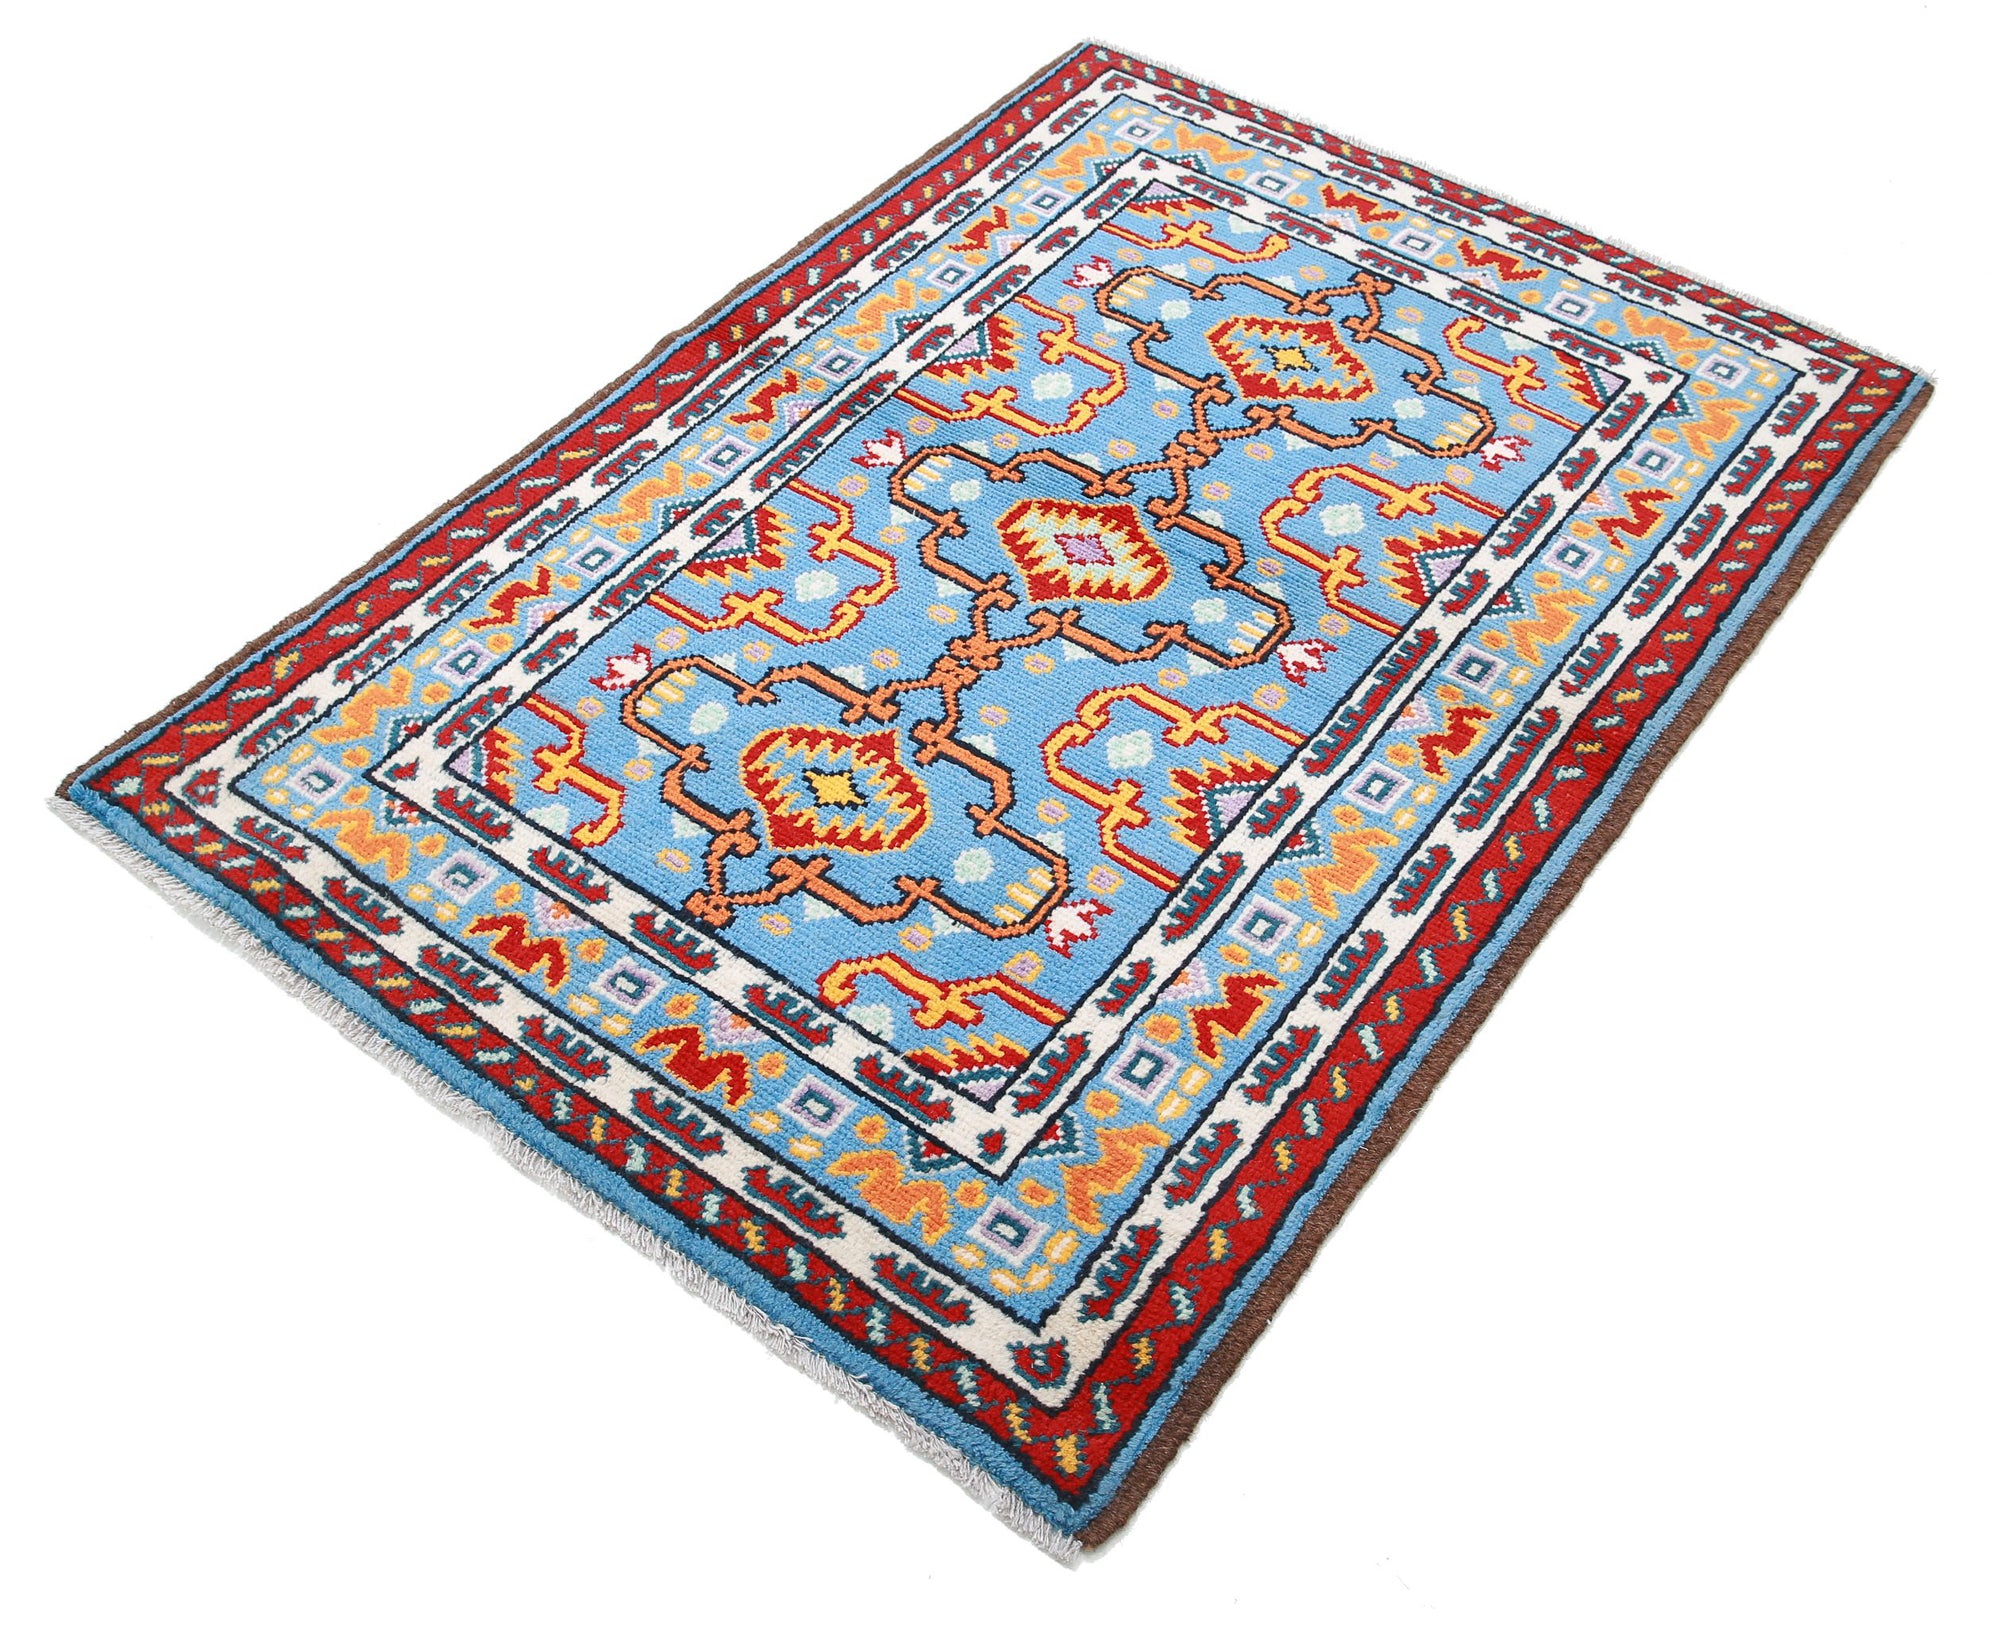 Revival-hand-knotted-qarghani-wool-rug-5014208-2.jpg